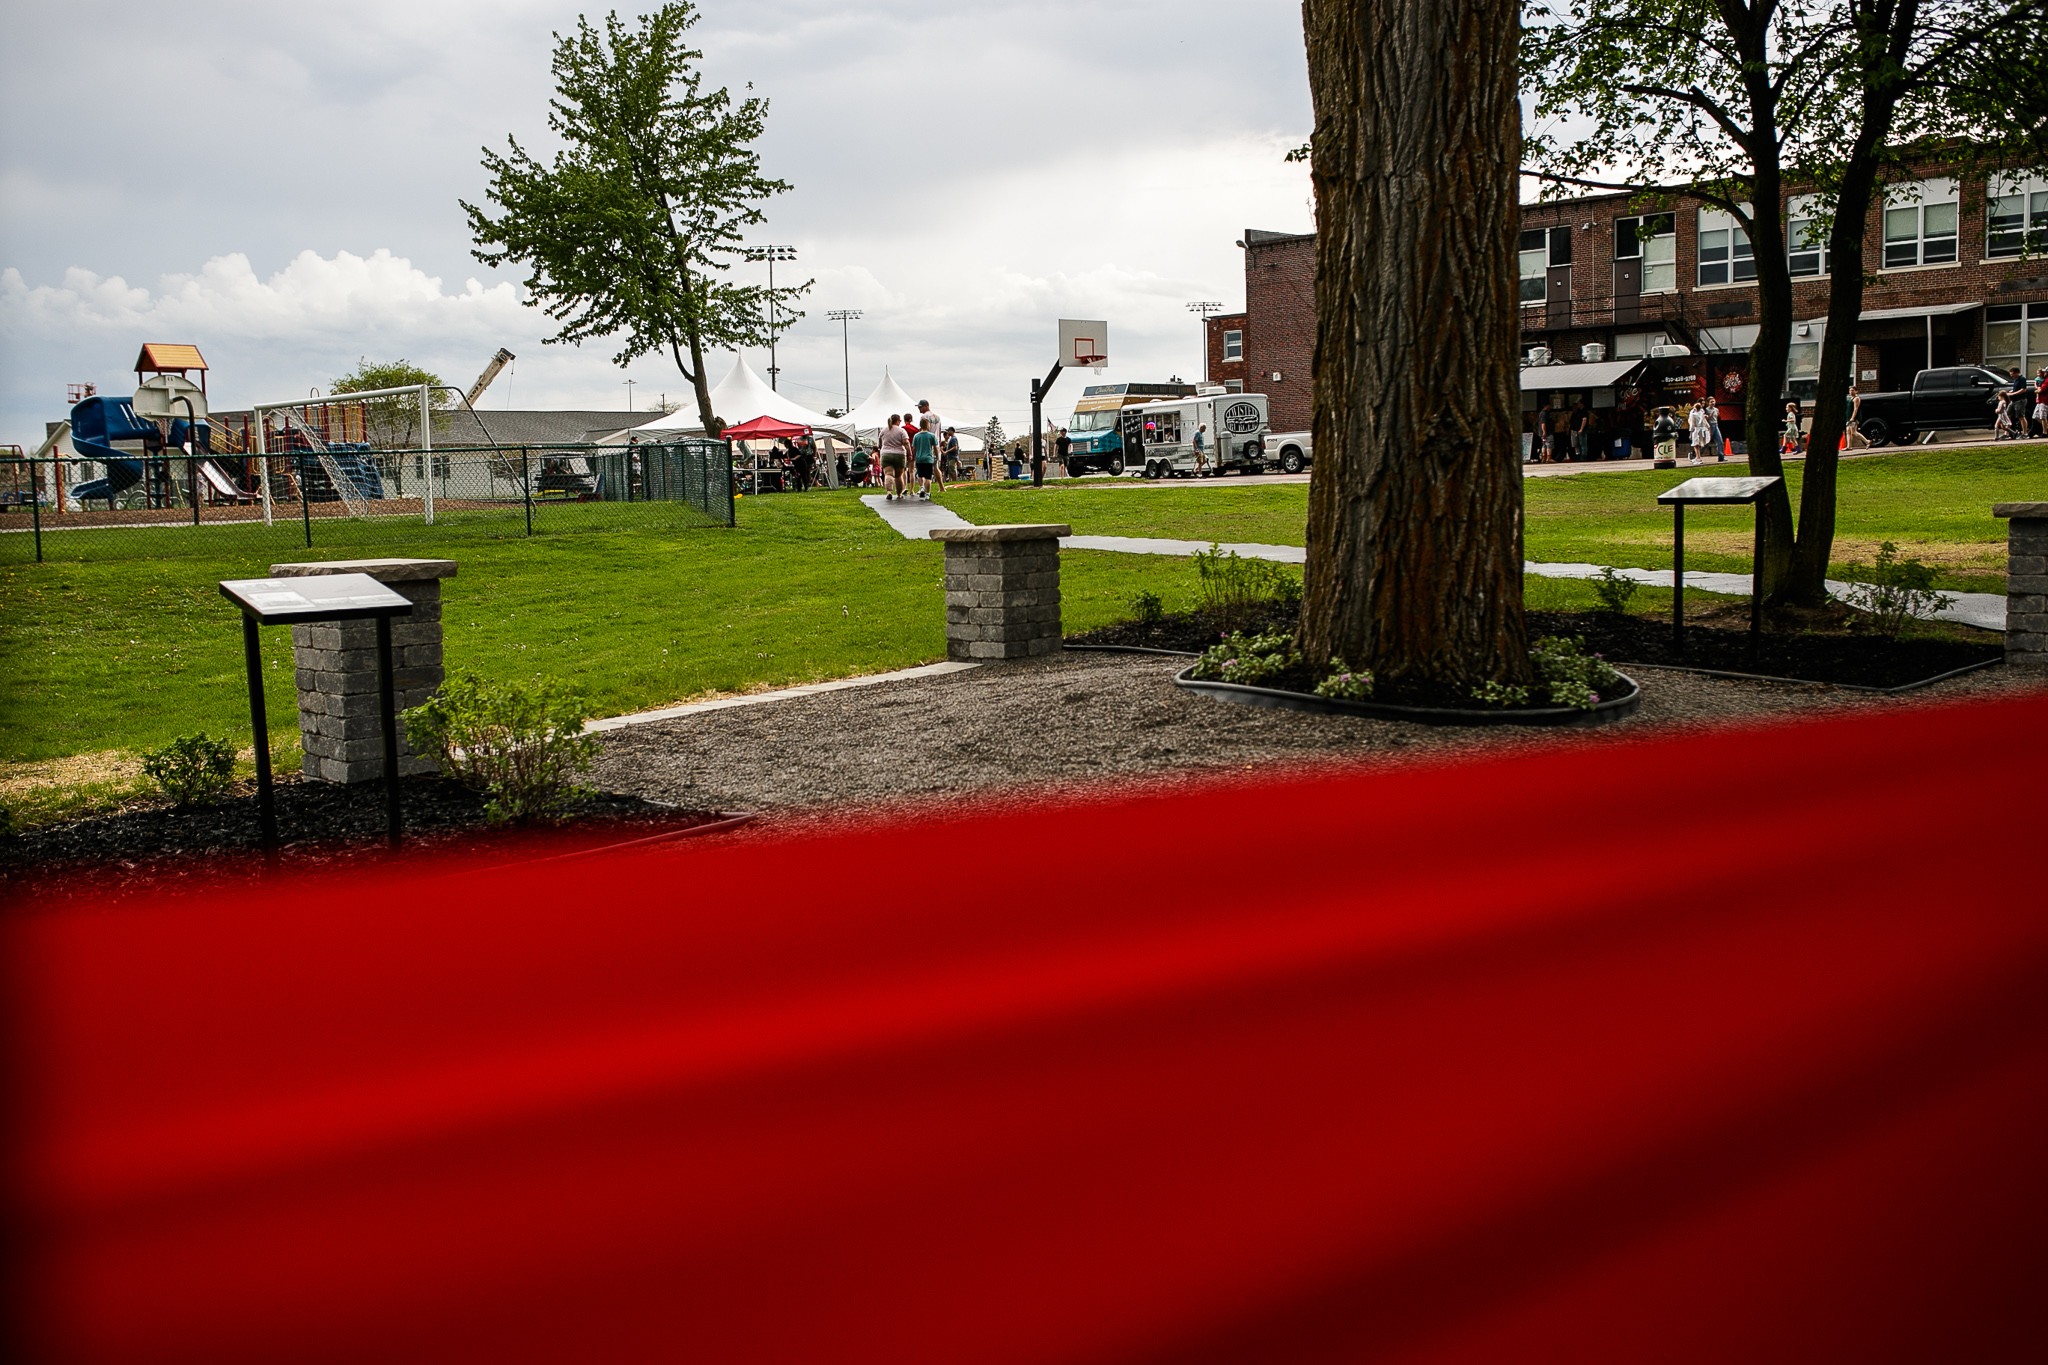 From behind the red ribbon on the new Perry Centennial Pavilion, event attendants can be seeing waiting in line for activities during the Perry Center Centennial Event in Grand Blanc on Saturday, May 14, 2022. (Jenifer Veloso | MLive.com)